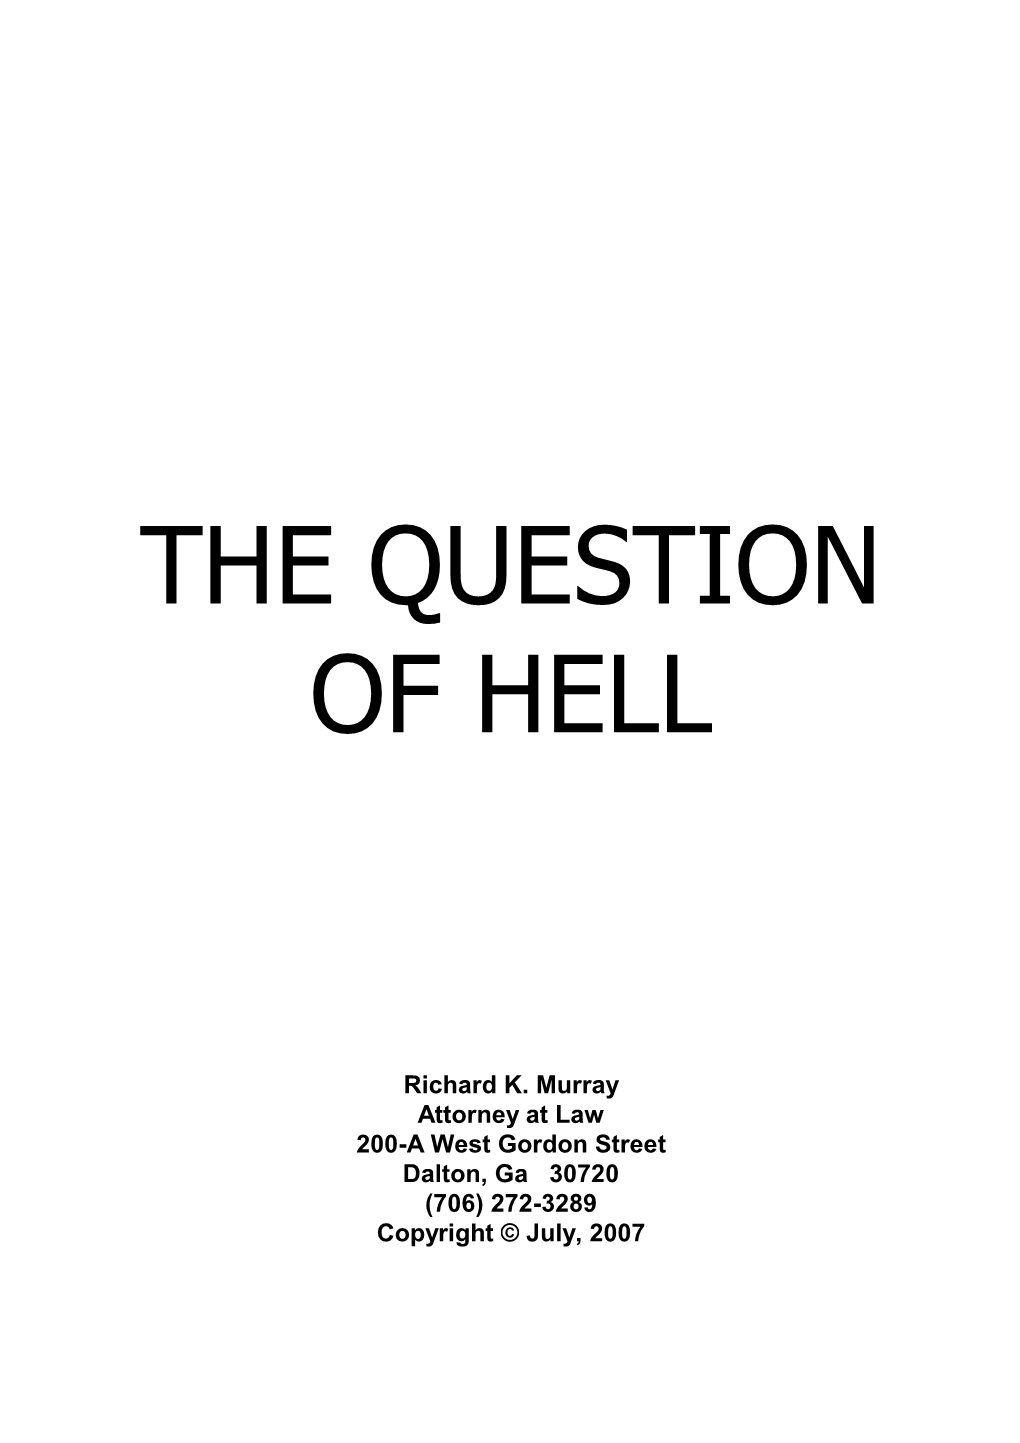 The Question of Hell